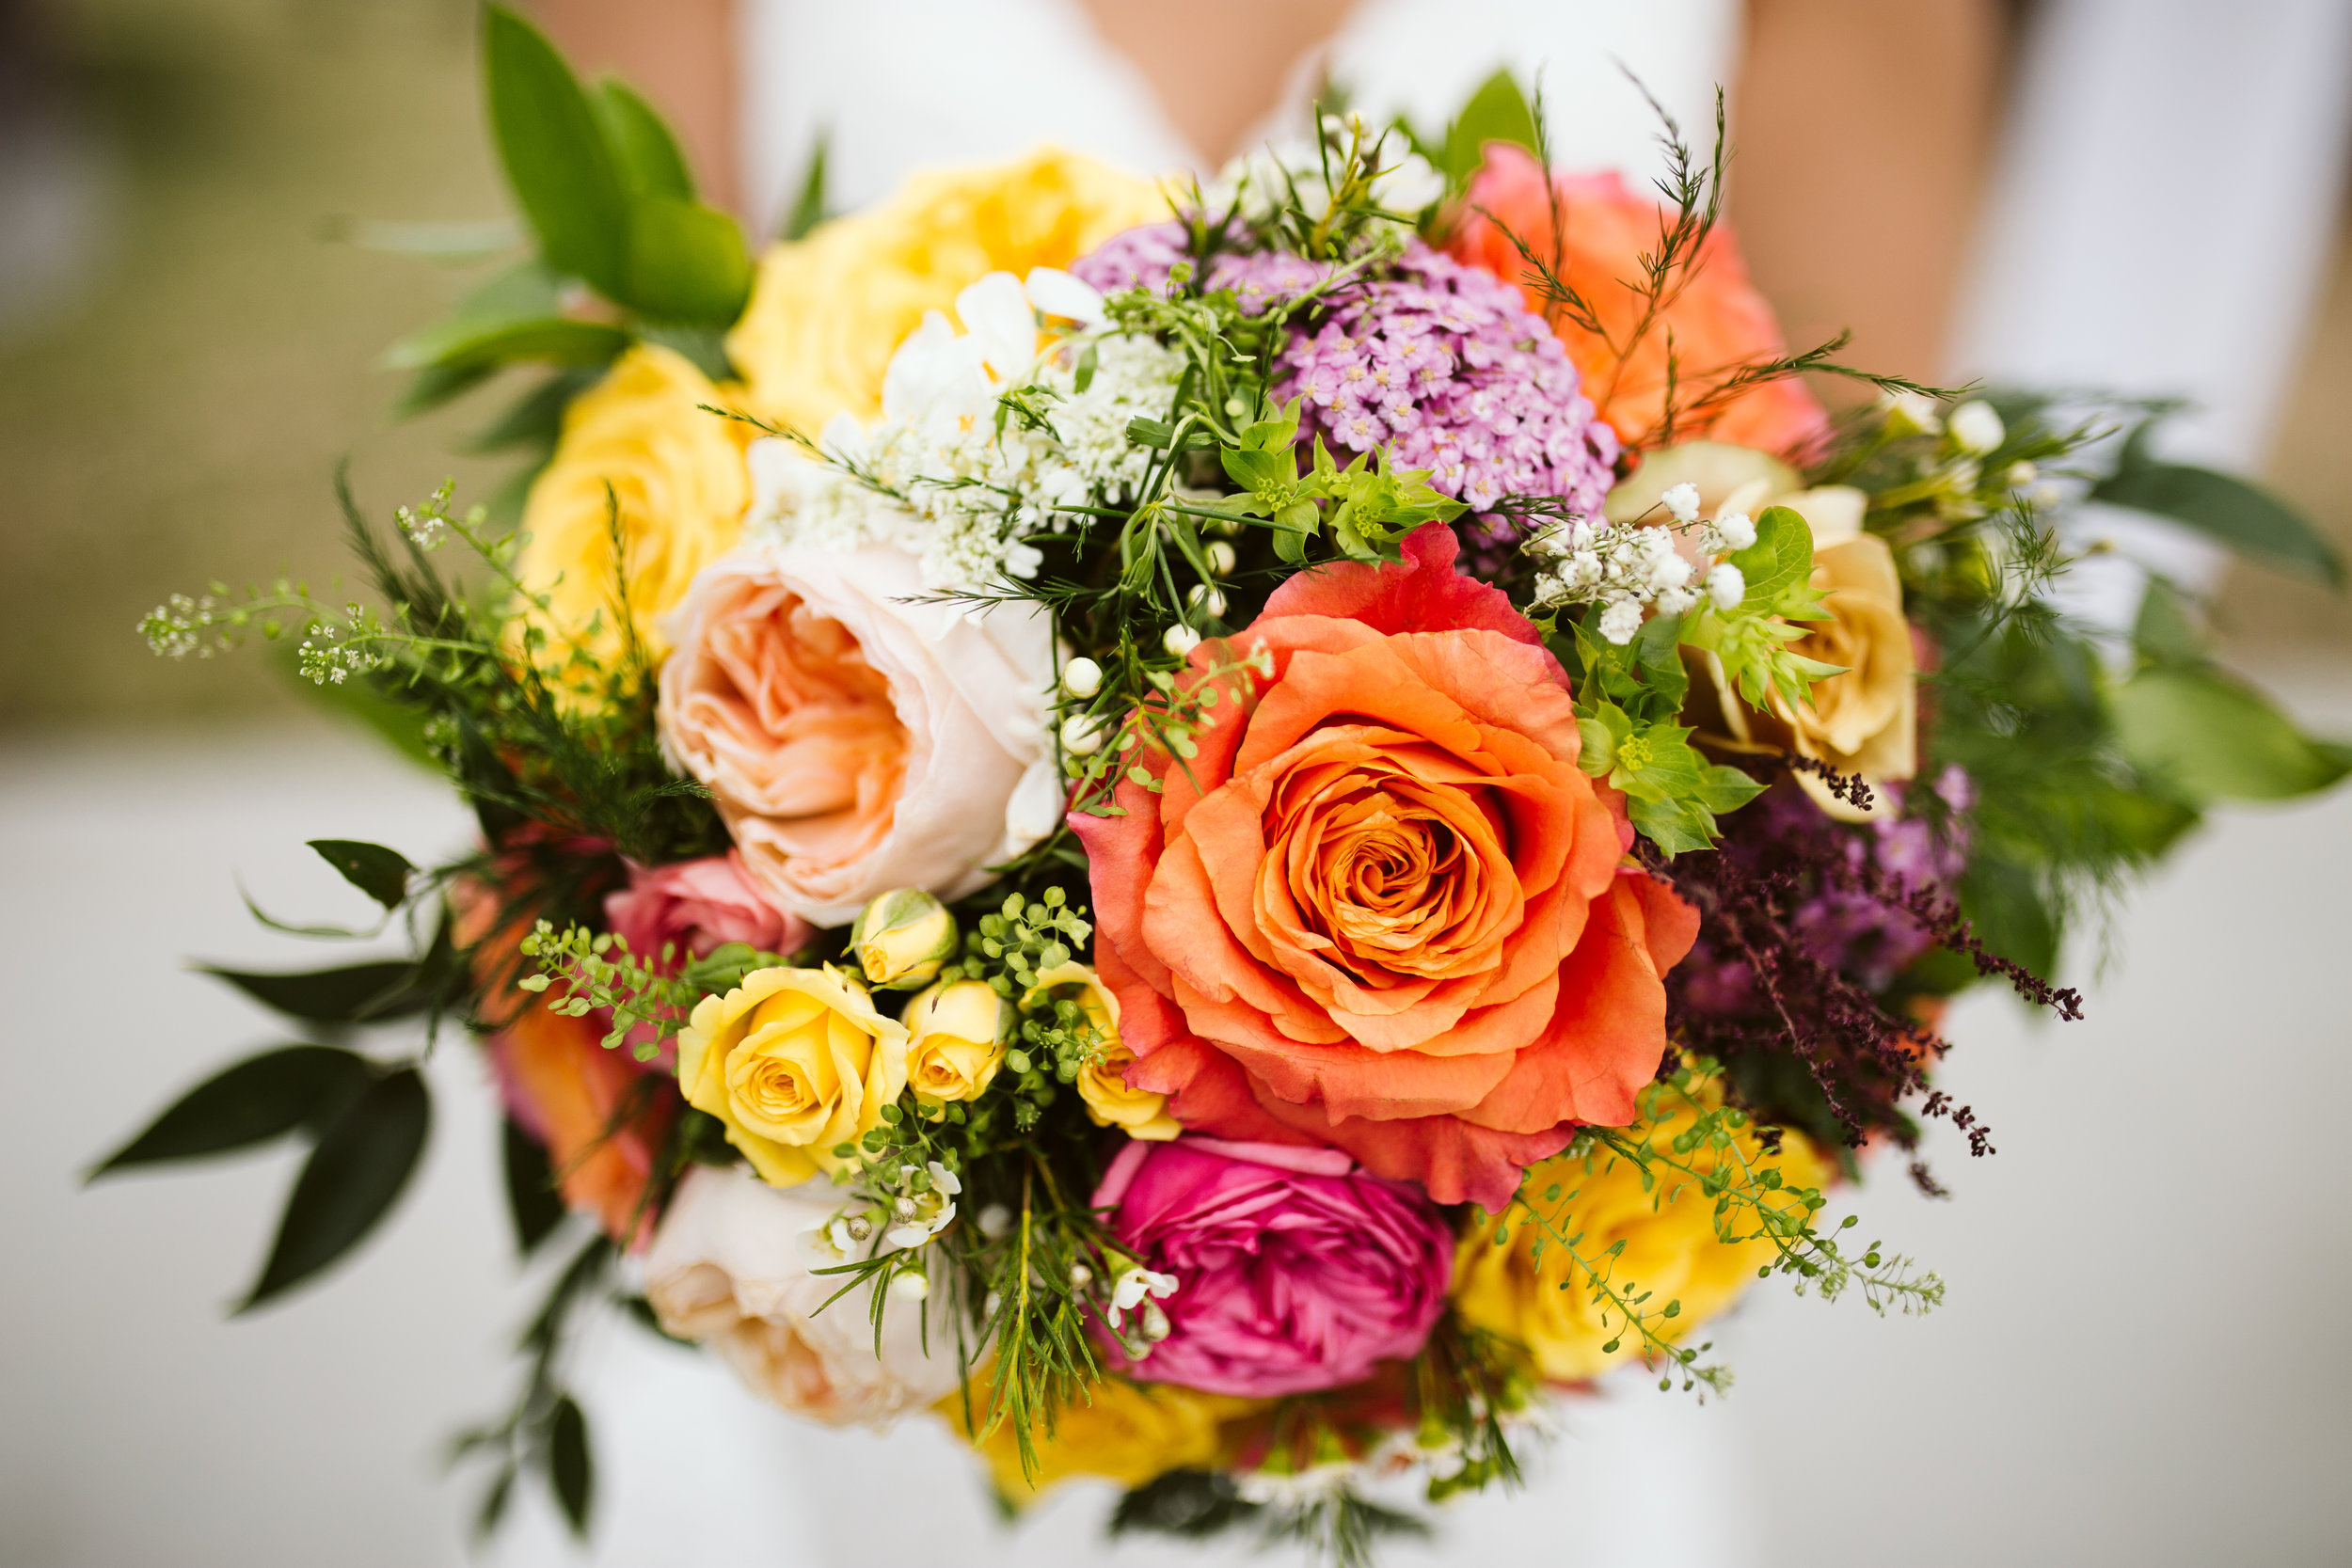 Petal Pushers STL bouquet for a Stone house of st charles wedding